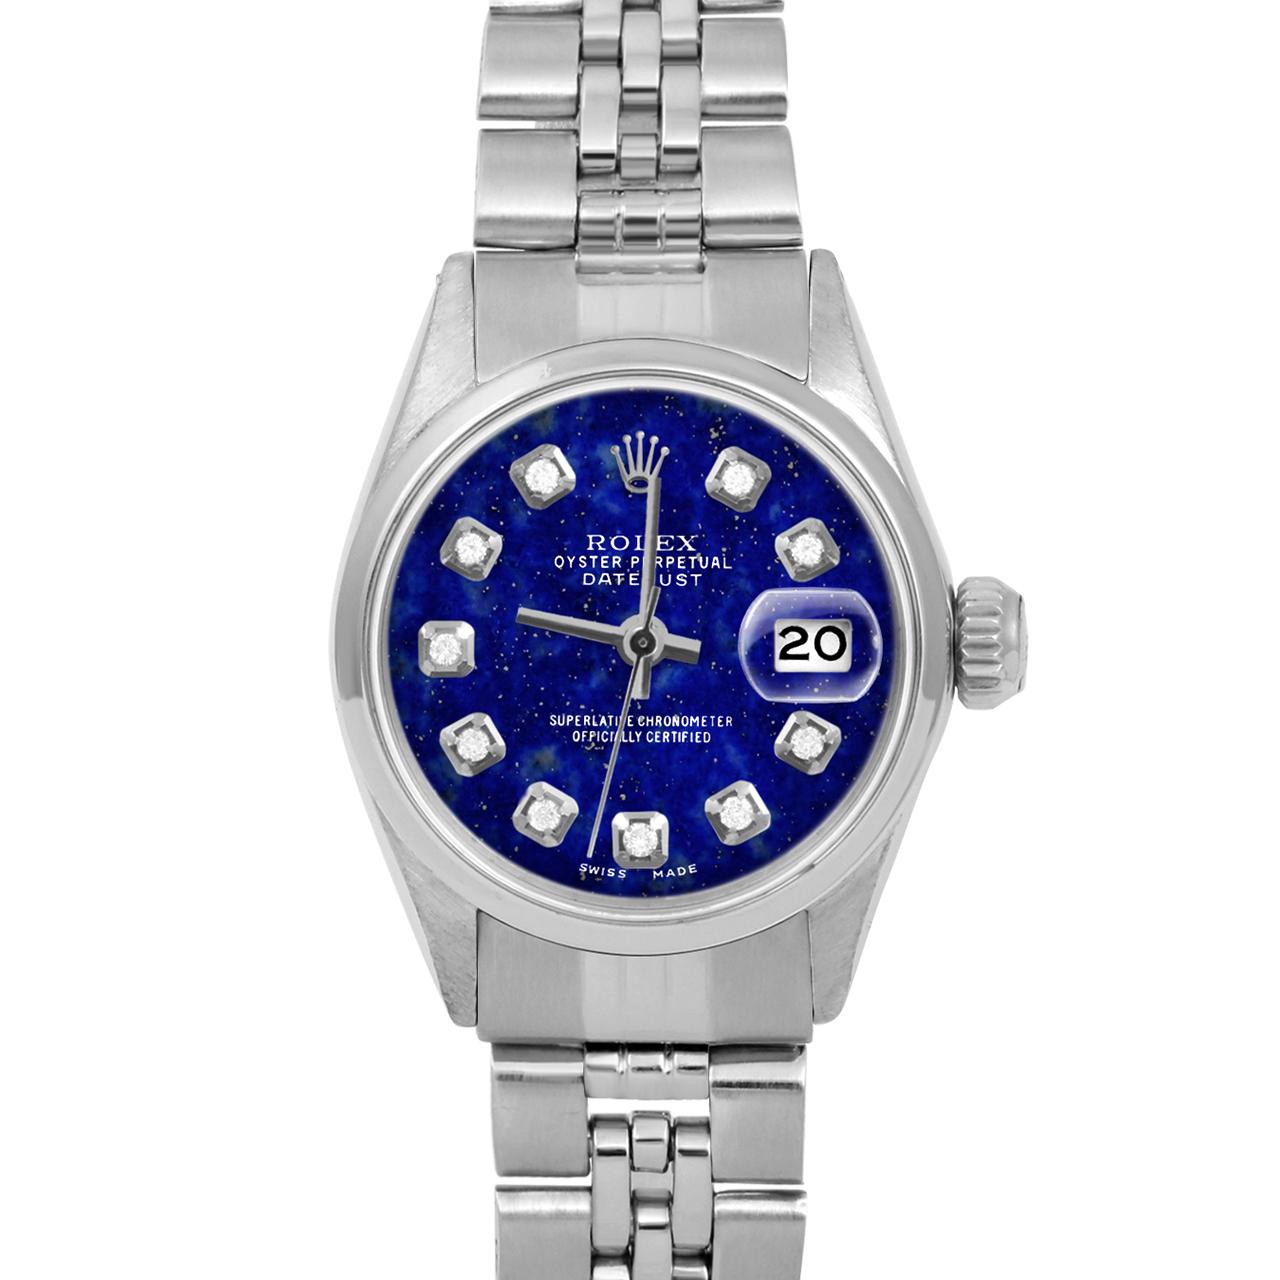 Brand : Rolex
Model : Datejust (Non-Quickset Model)
Gender : Ladies
Metals : Stainless Steel
Case Size : 24 mm

Dial : Custom Lapis Diamond Dial (This dial is not original Rolex And has been added aftermarket yet is a beautiful Custom